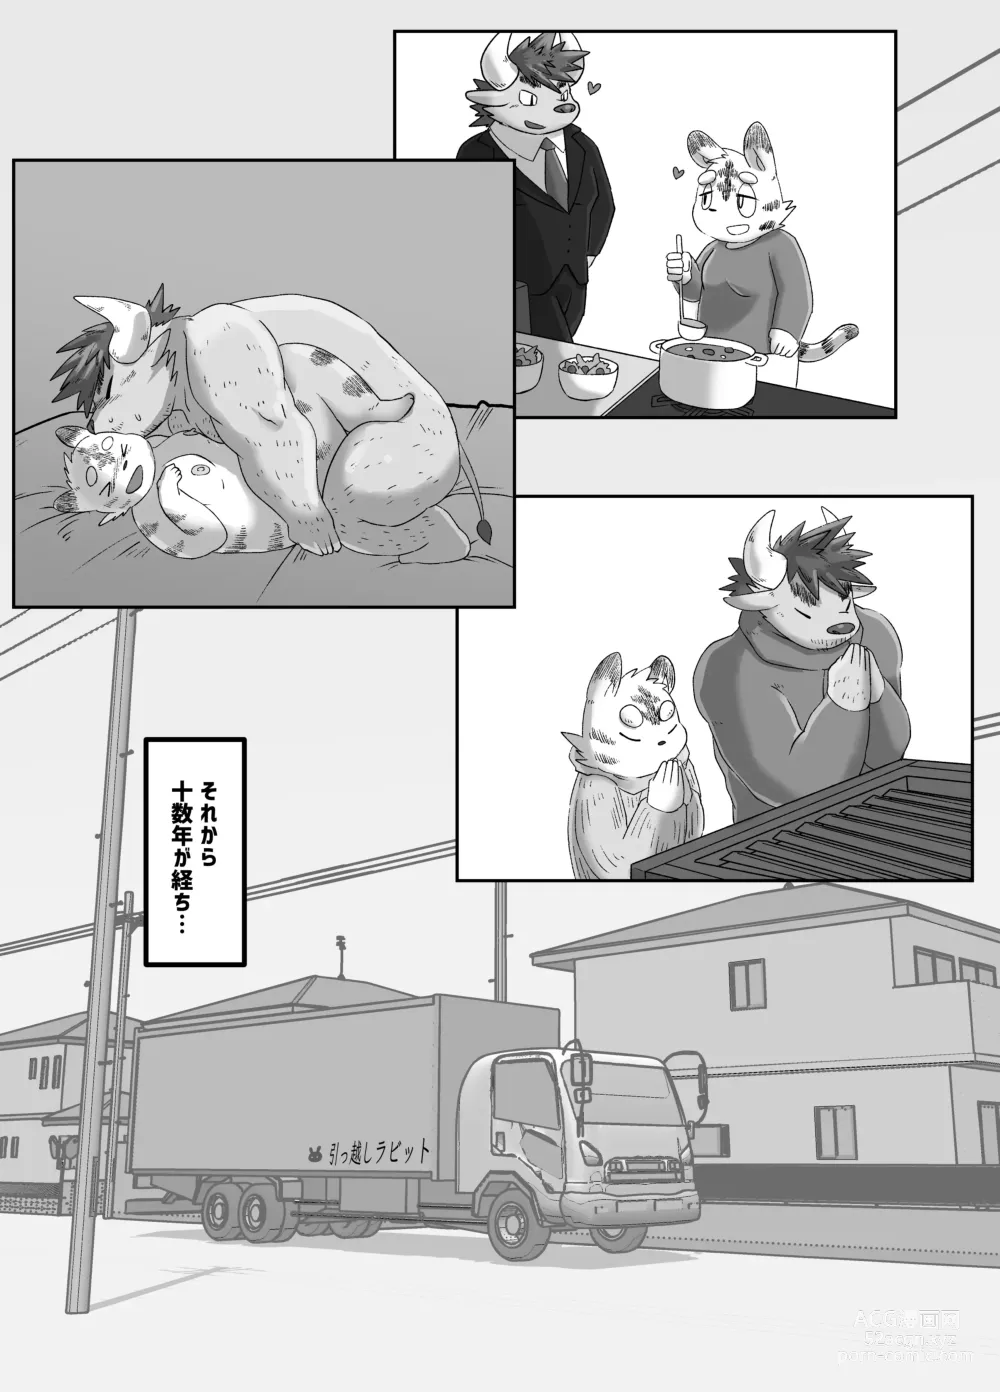 Page 20 of doujinshi Muscular Bull Teacher & Chubby Tiger Student 5